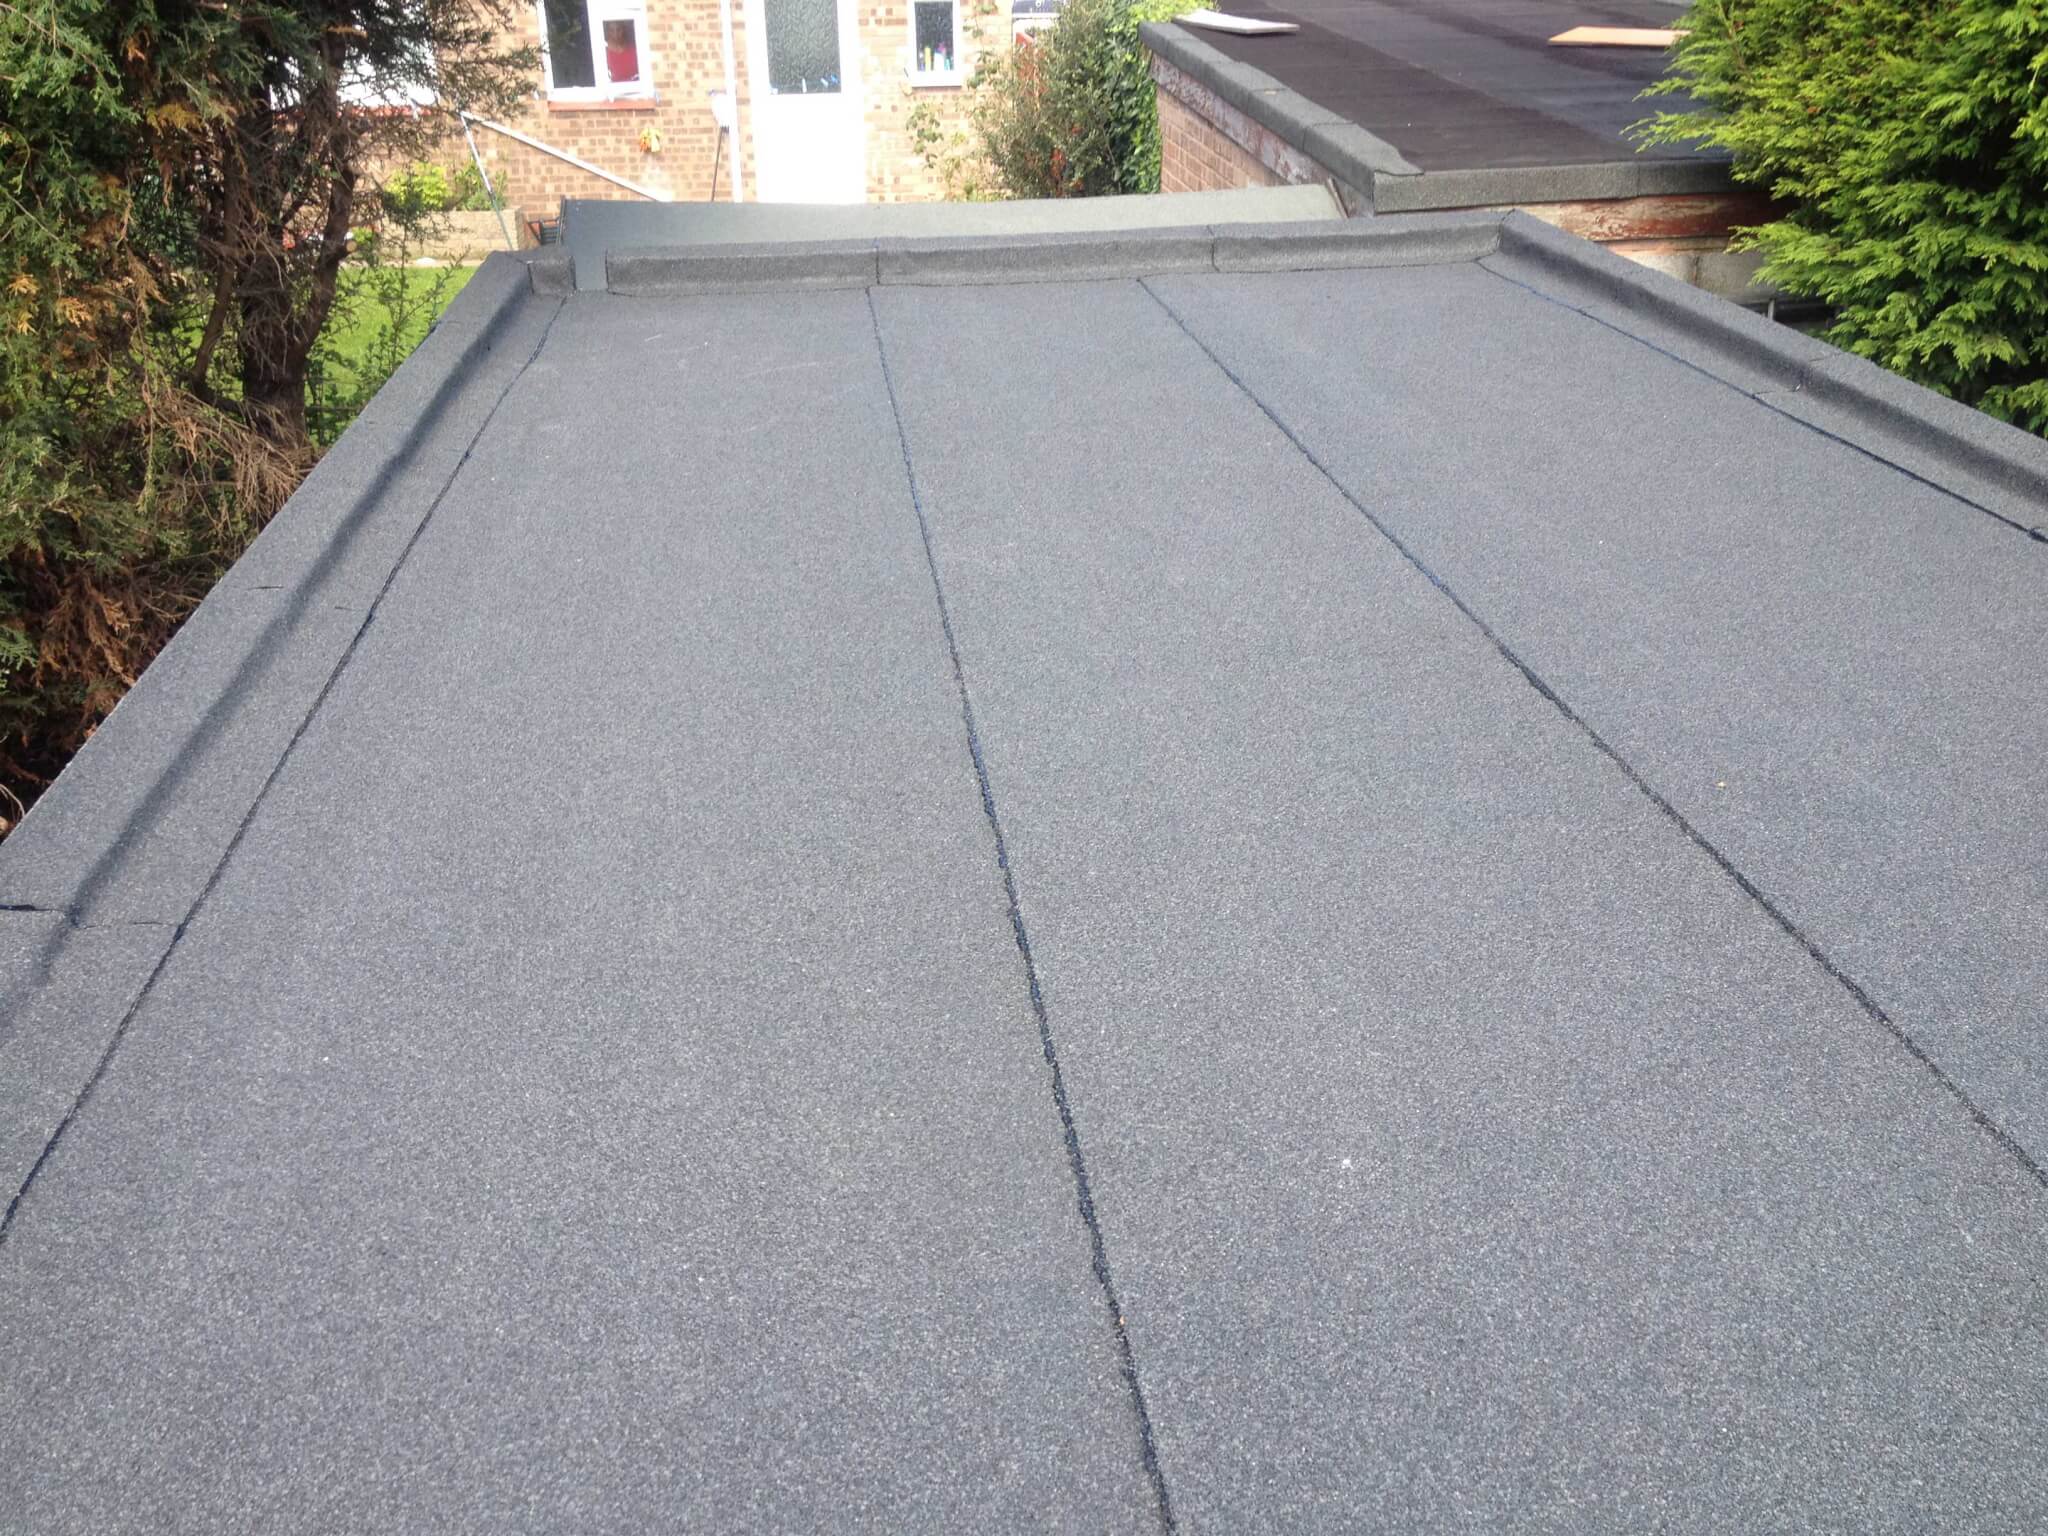 Flat Roofs Midwest Roofing